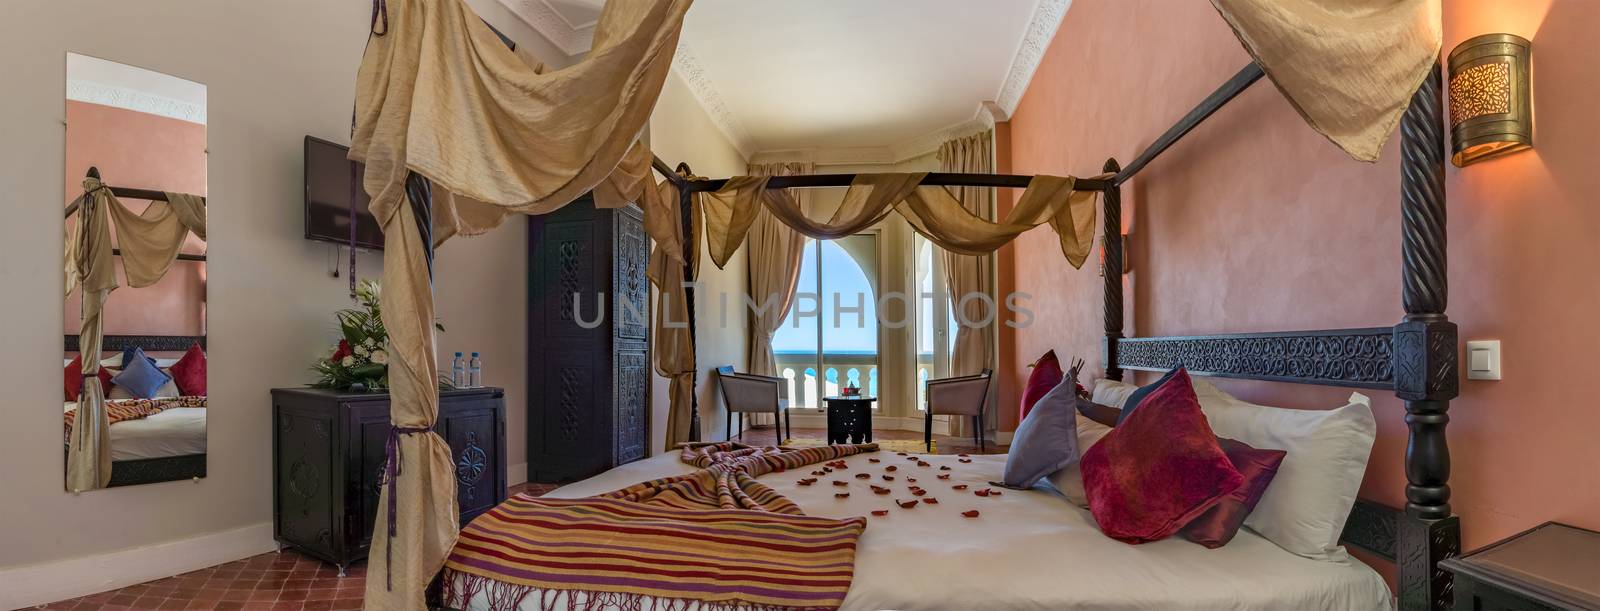 Panoramic view on a luxury bedroom with seaview